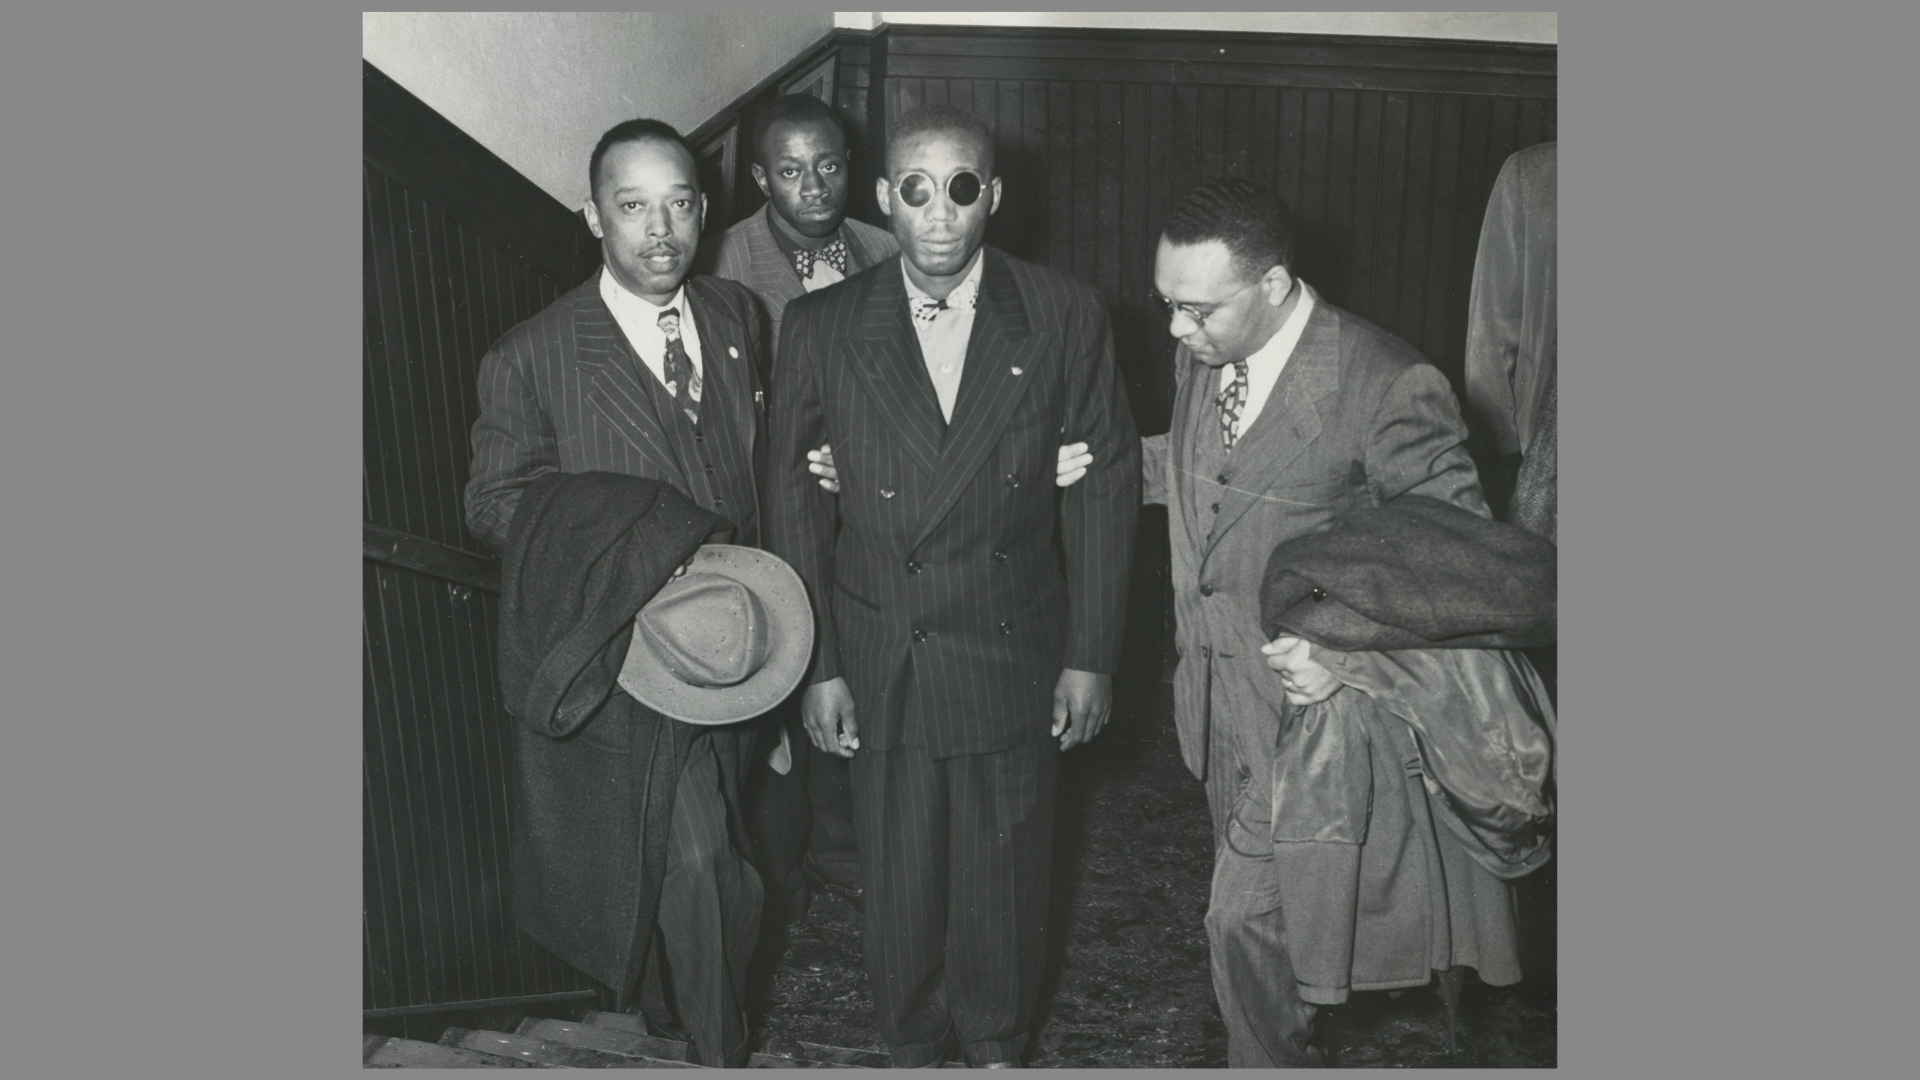 In 1946, Isaac Woodard, a Black Army Sergeant was Beaten Savagely by the Local Chief of Police